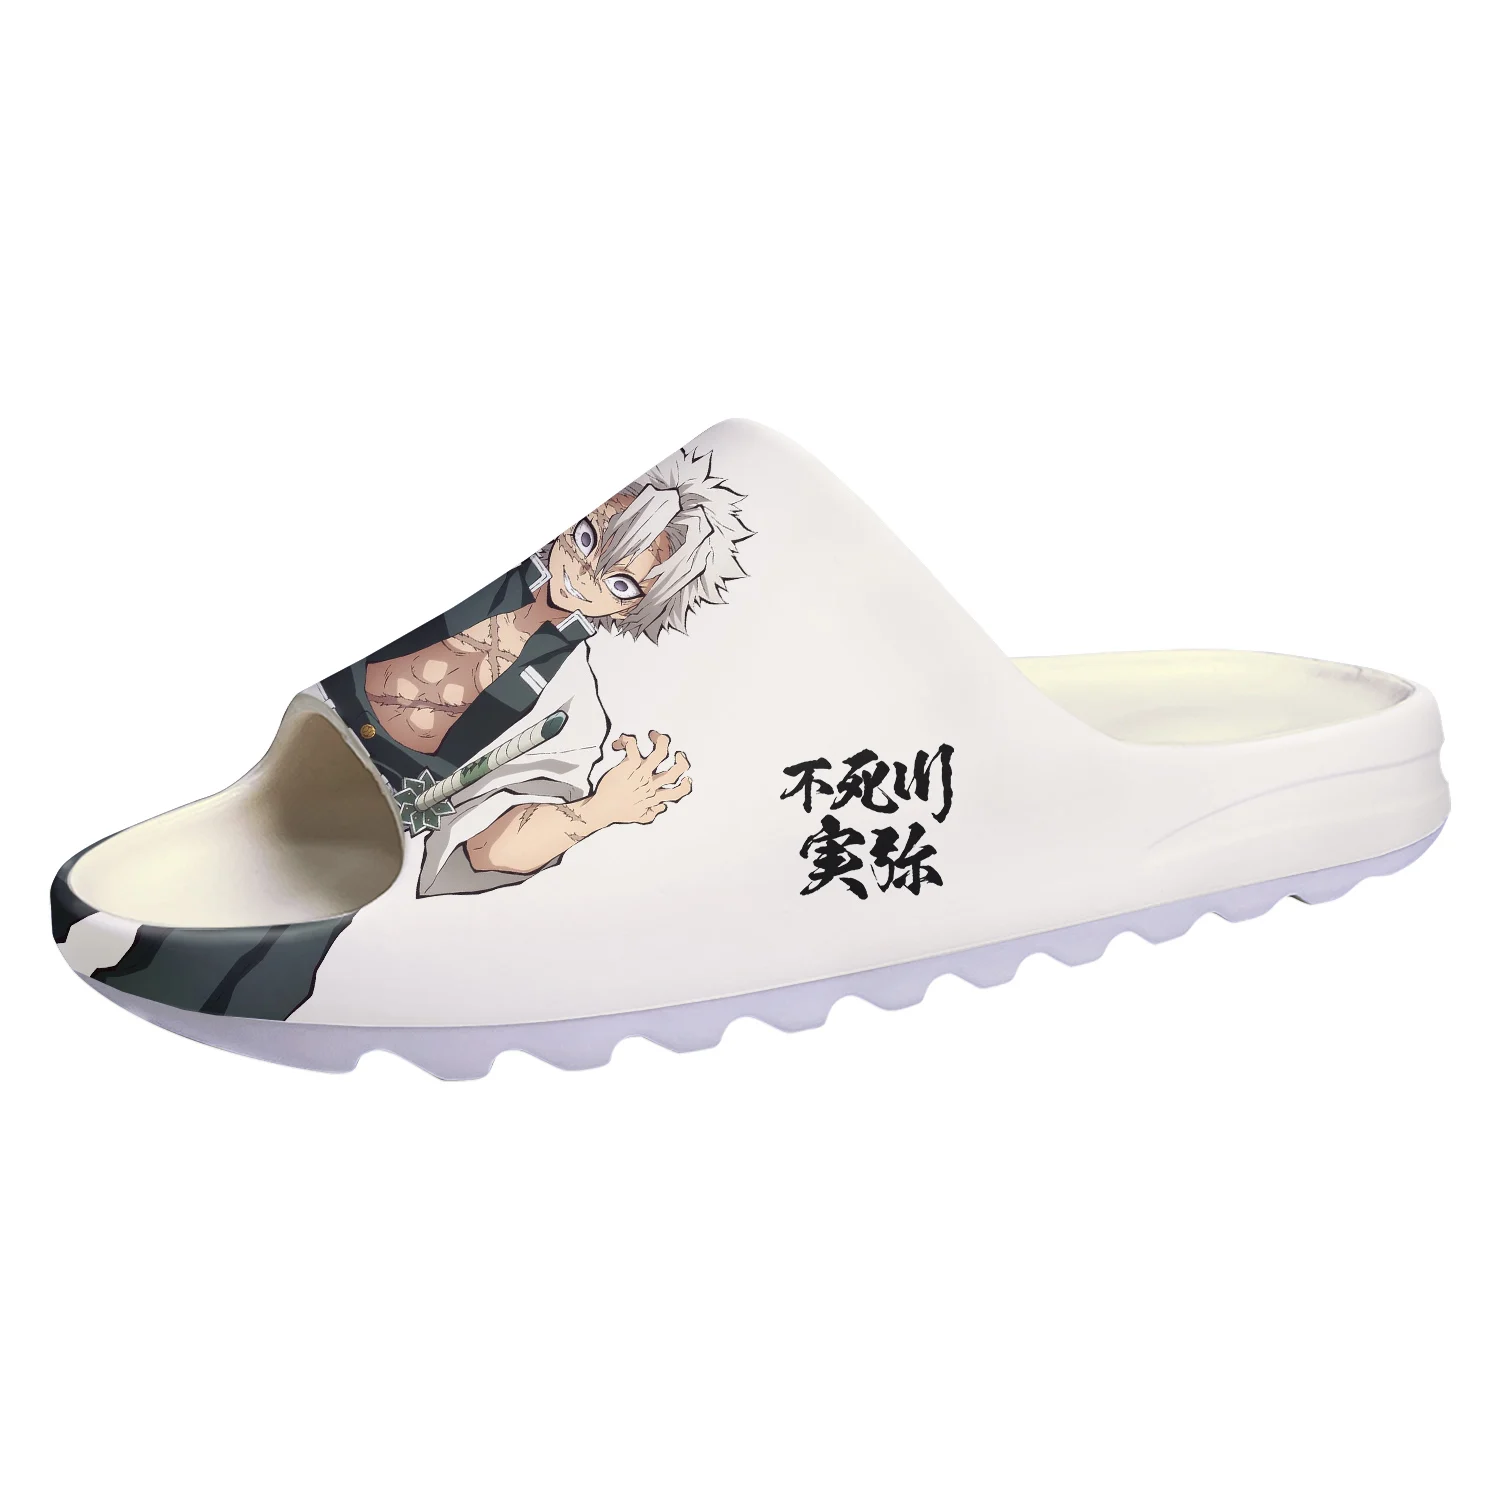 

Shinazugawa Sanemi Soft Sole Sllipers Demon Slayer Mens Womens Teenager Home Clogs Step In Water Shoes On Shit Customize Sandals